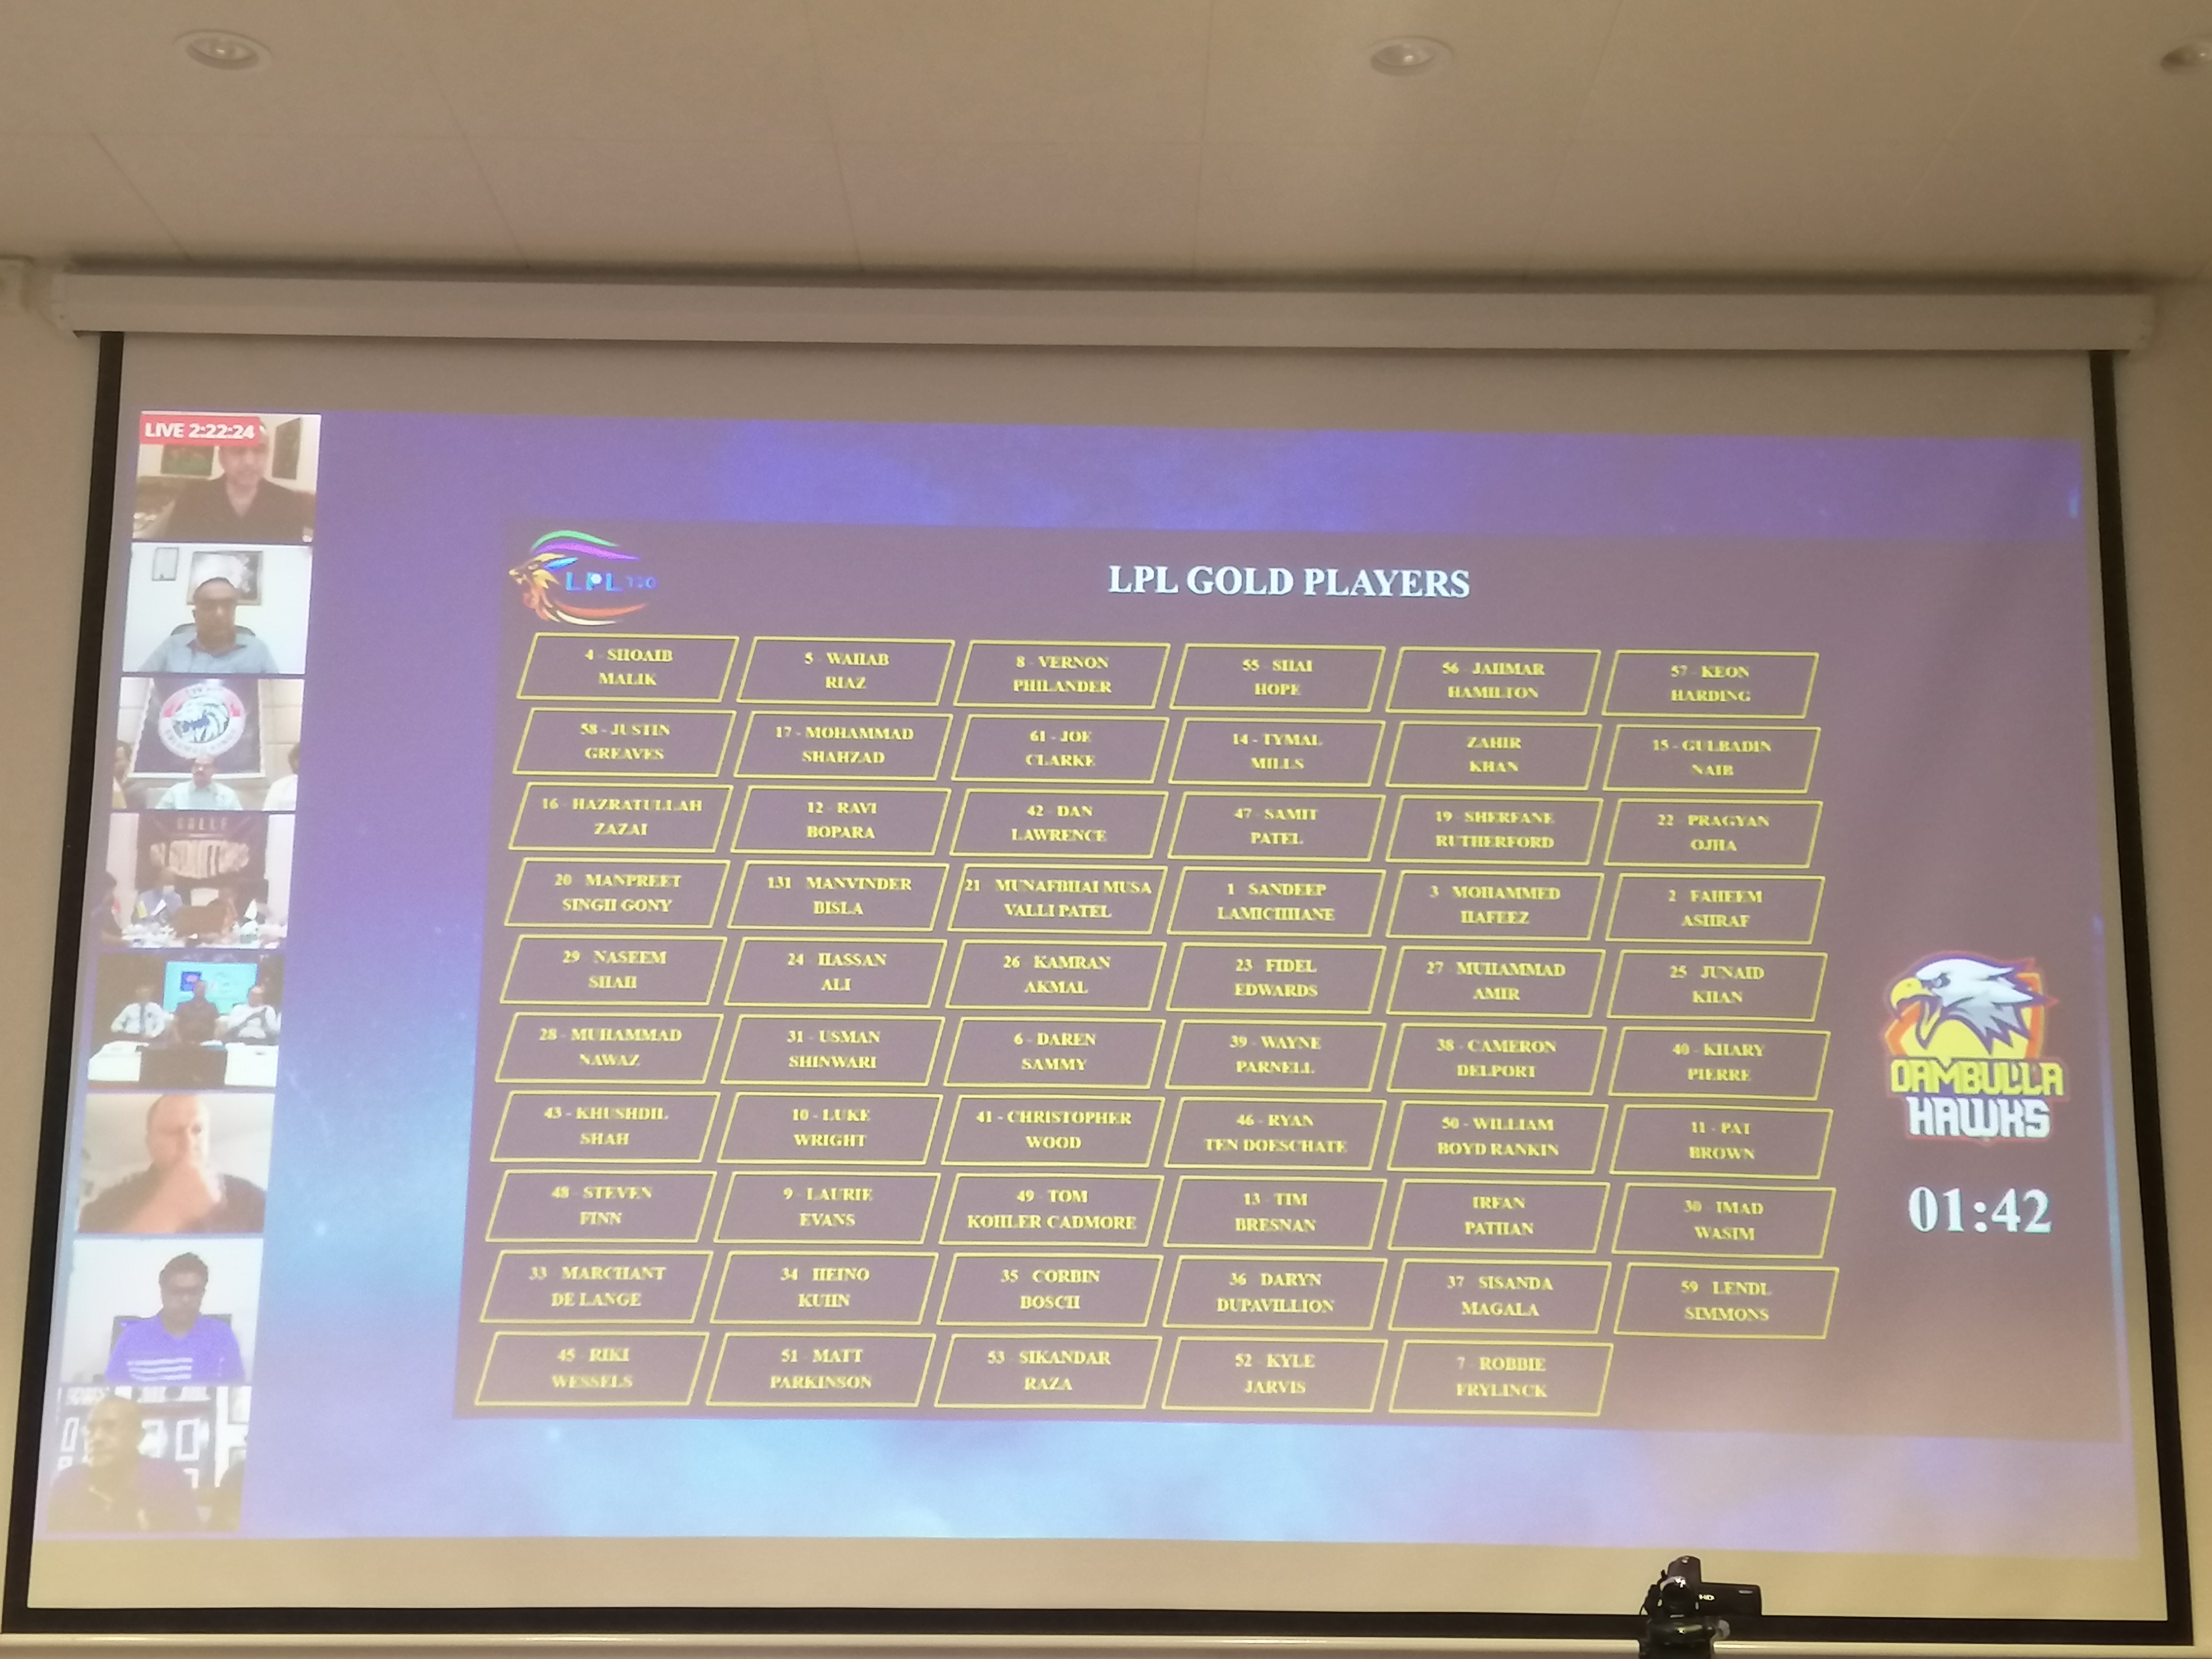 258 Local Players was included in the ‘LPL Player Draft’